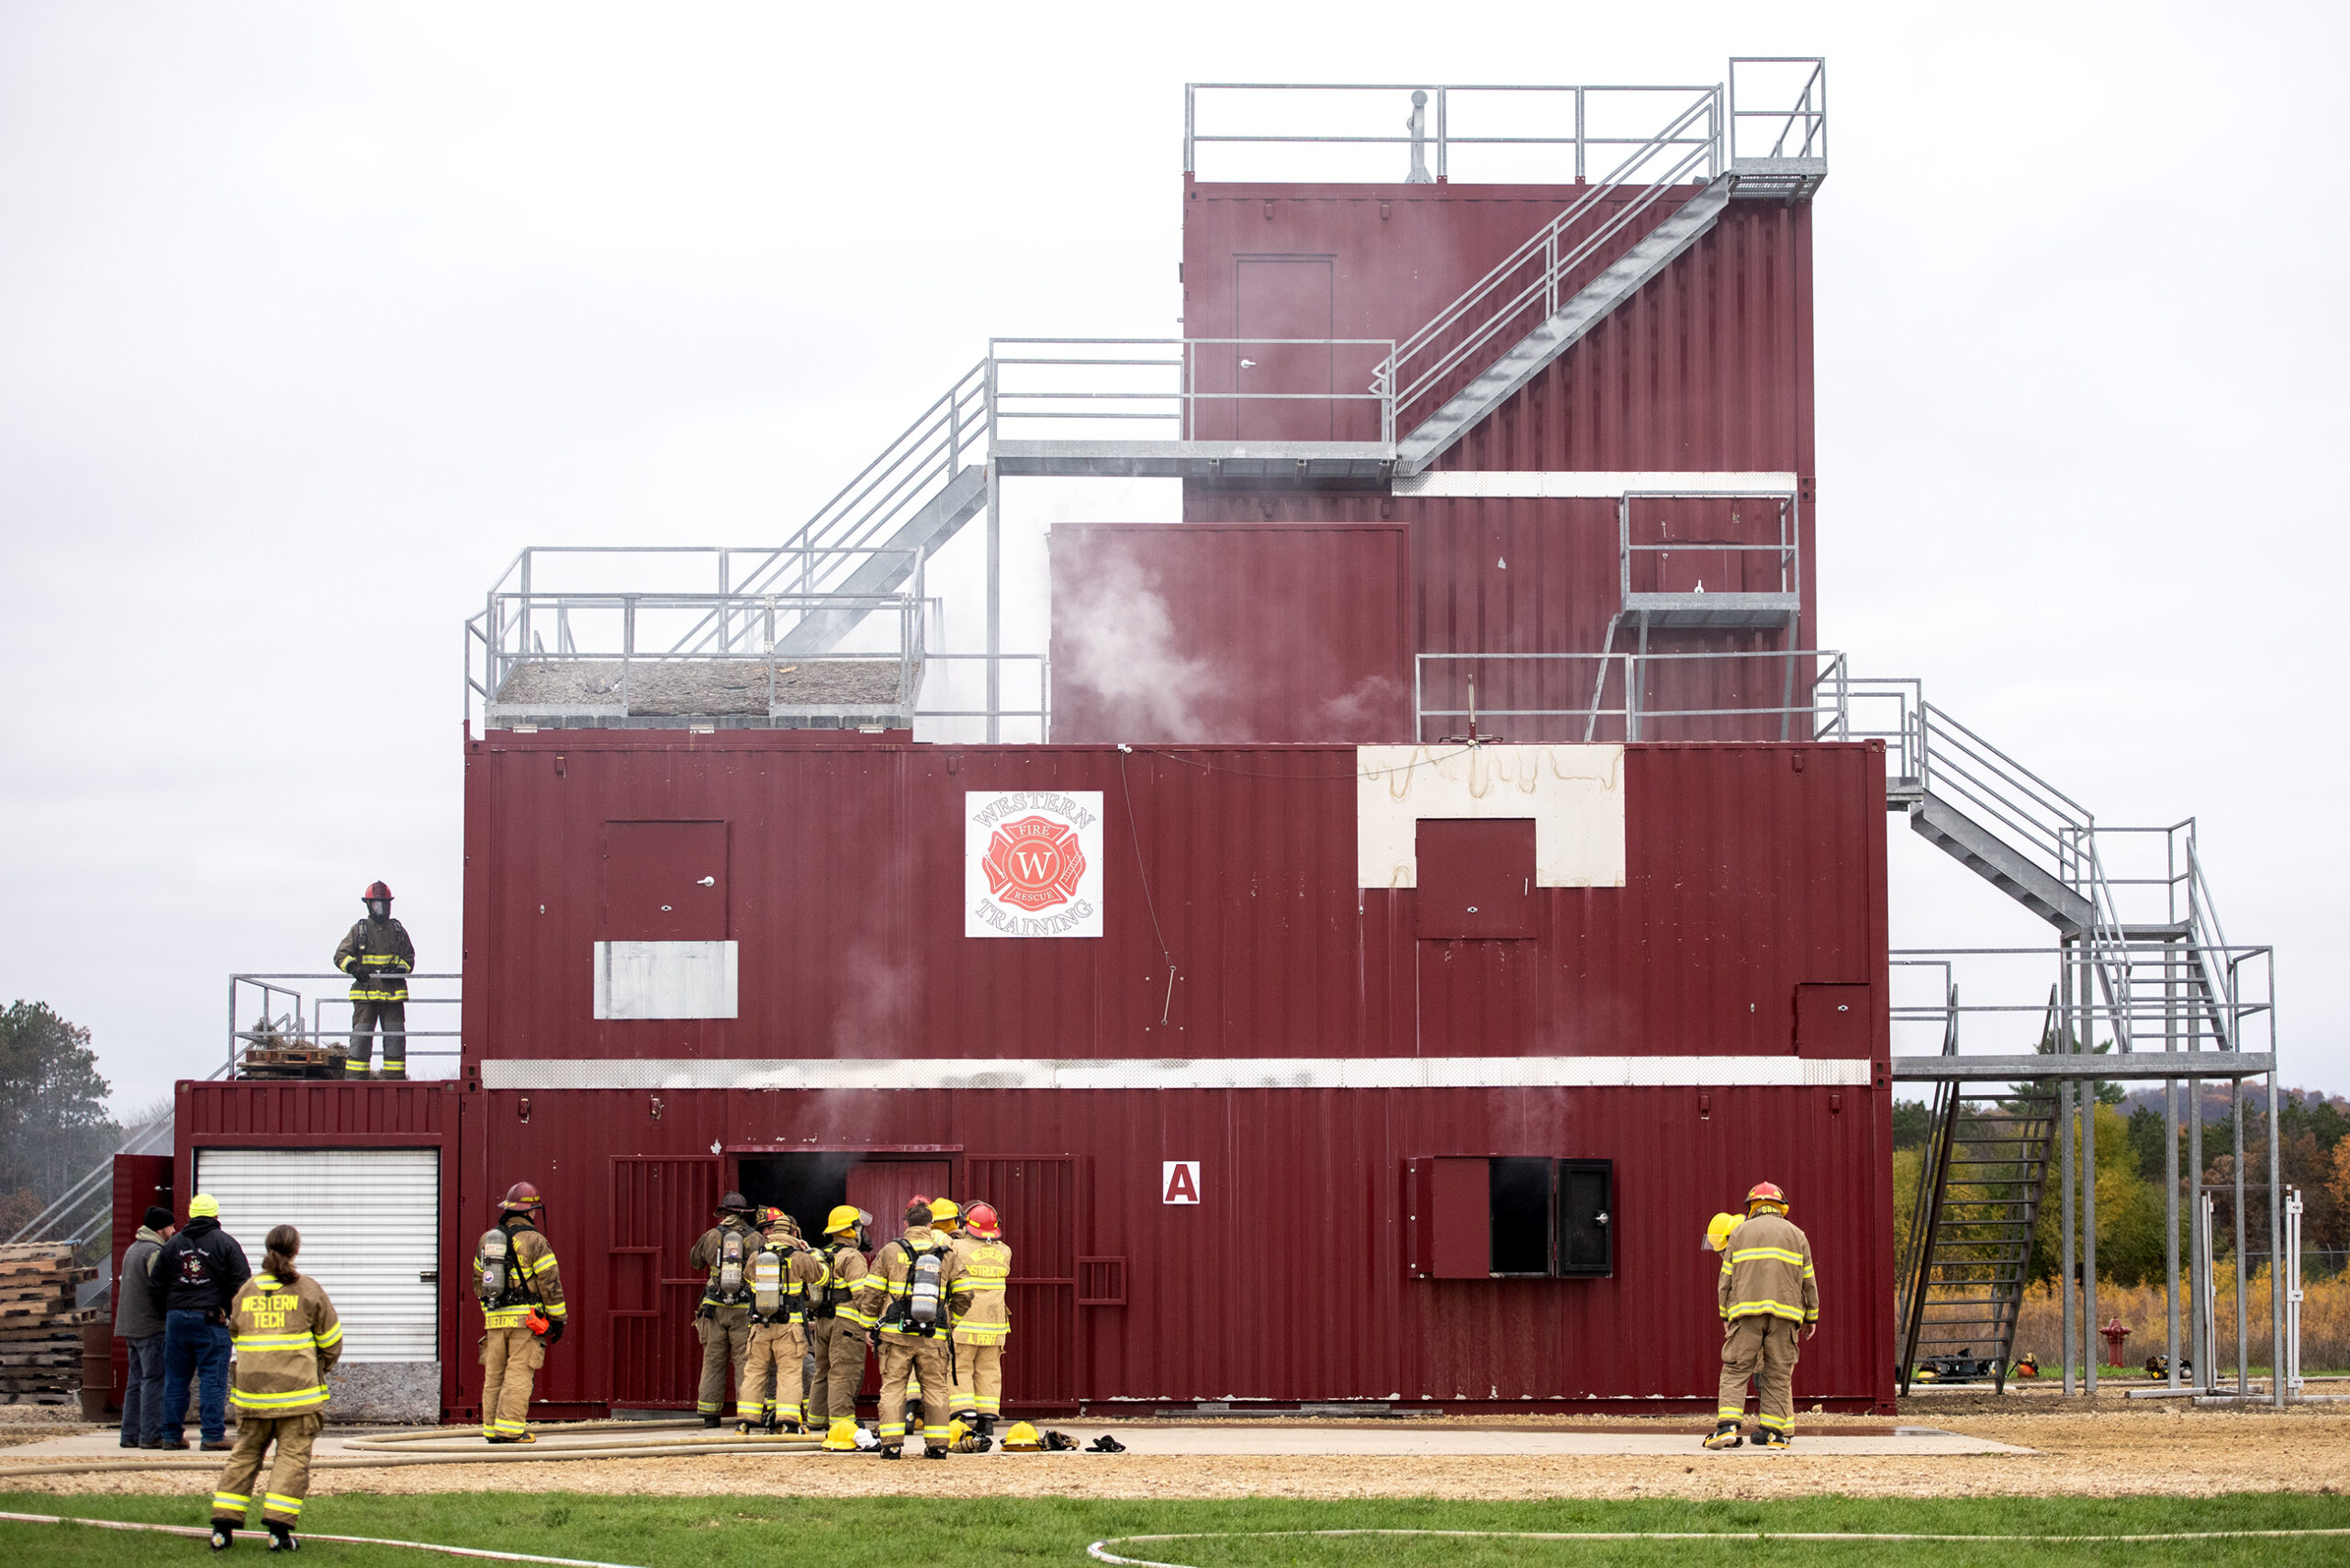 Smoke billows out of a red metal structure as participants in firefighter attire move around during the exercise.